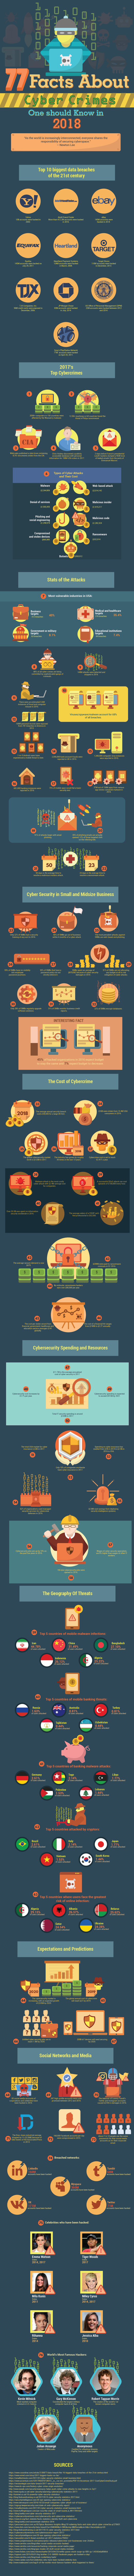 77 Facts on Cyber Crime